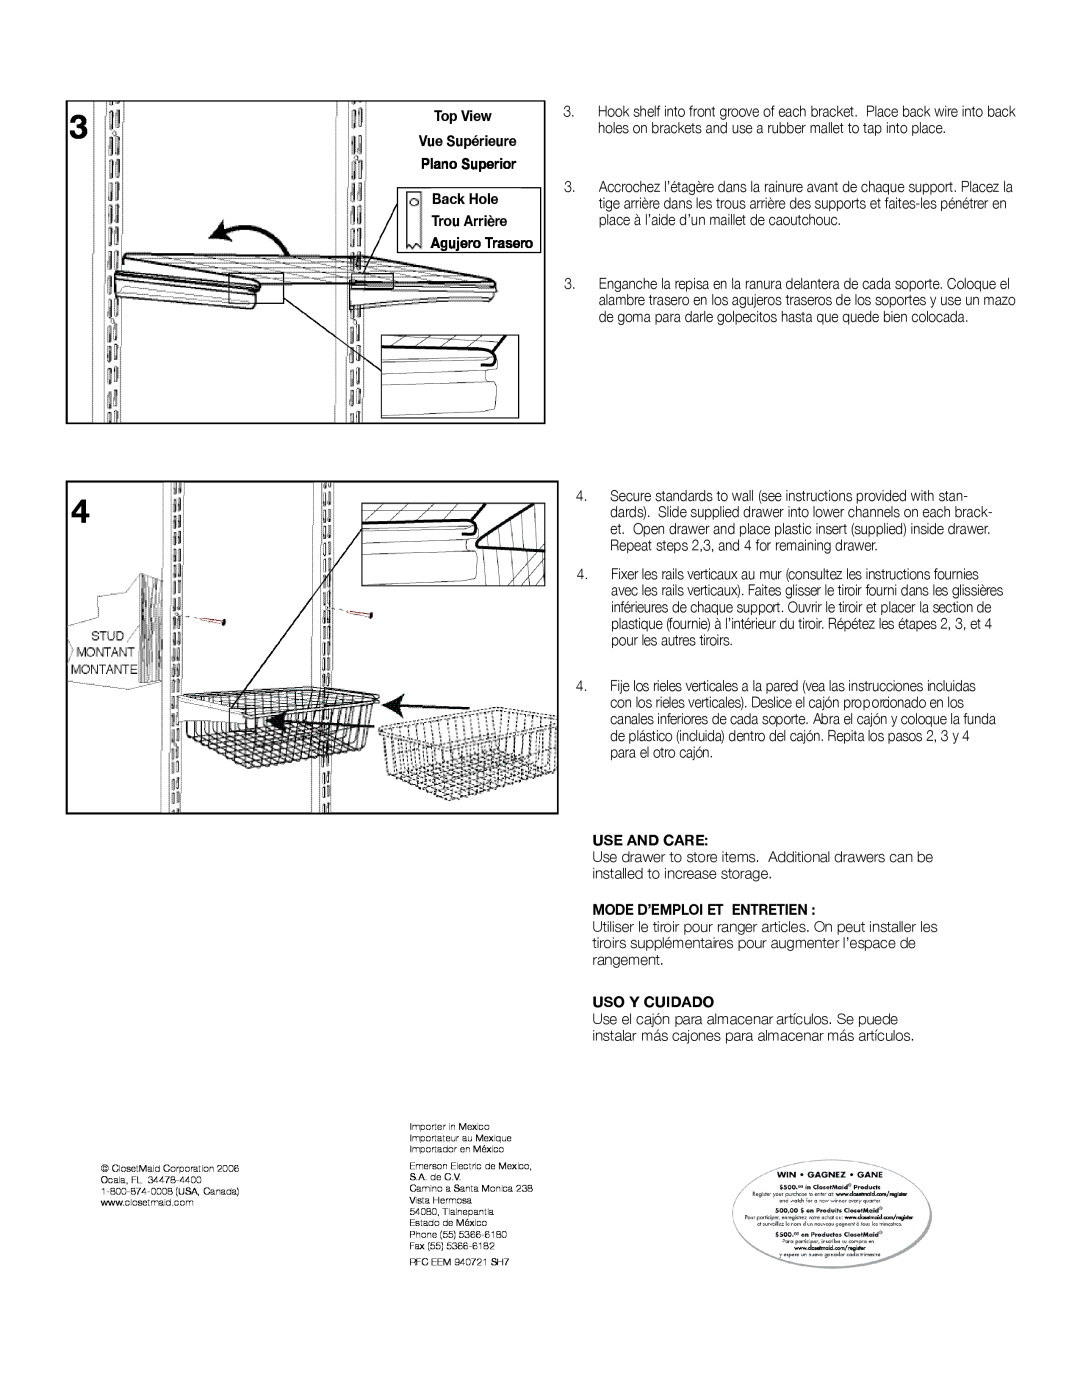 Closet Maid 93775 installation instructions Top View, Back Hole, Use And Care, Mode D’Emploi Et Entretien, Uso Y Cuidado 